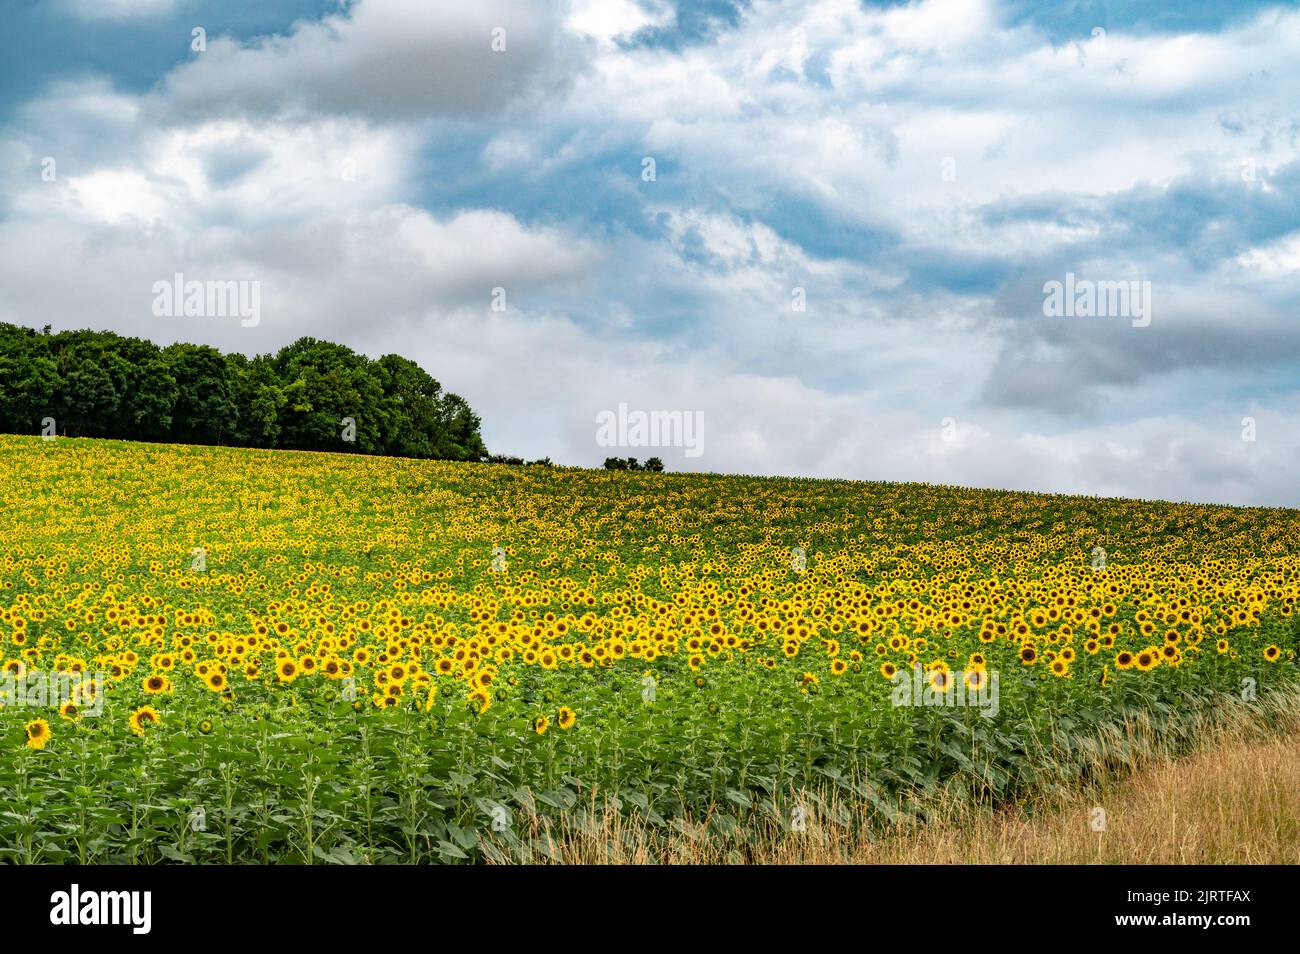 Sunflowers blossoming near Sercy in Burgundy, France Stock Photo